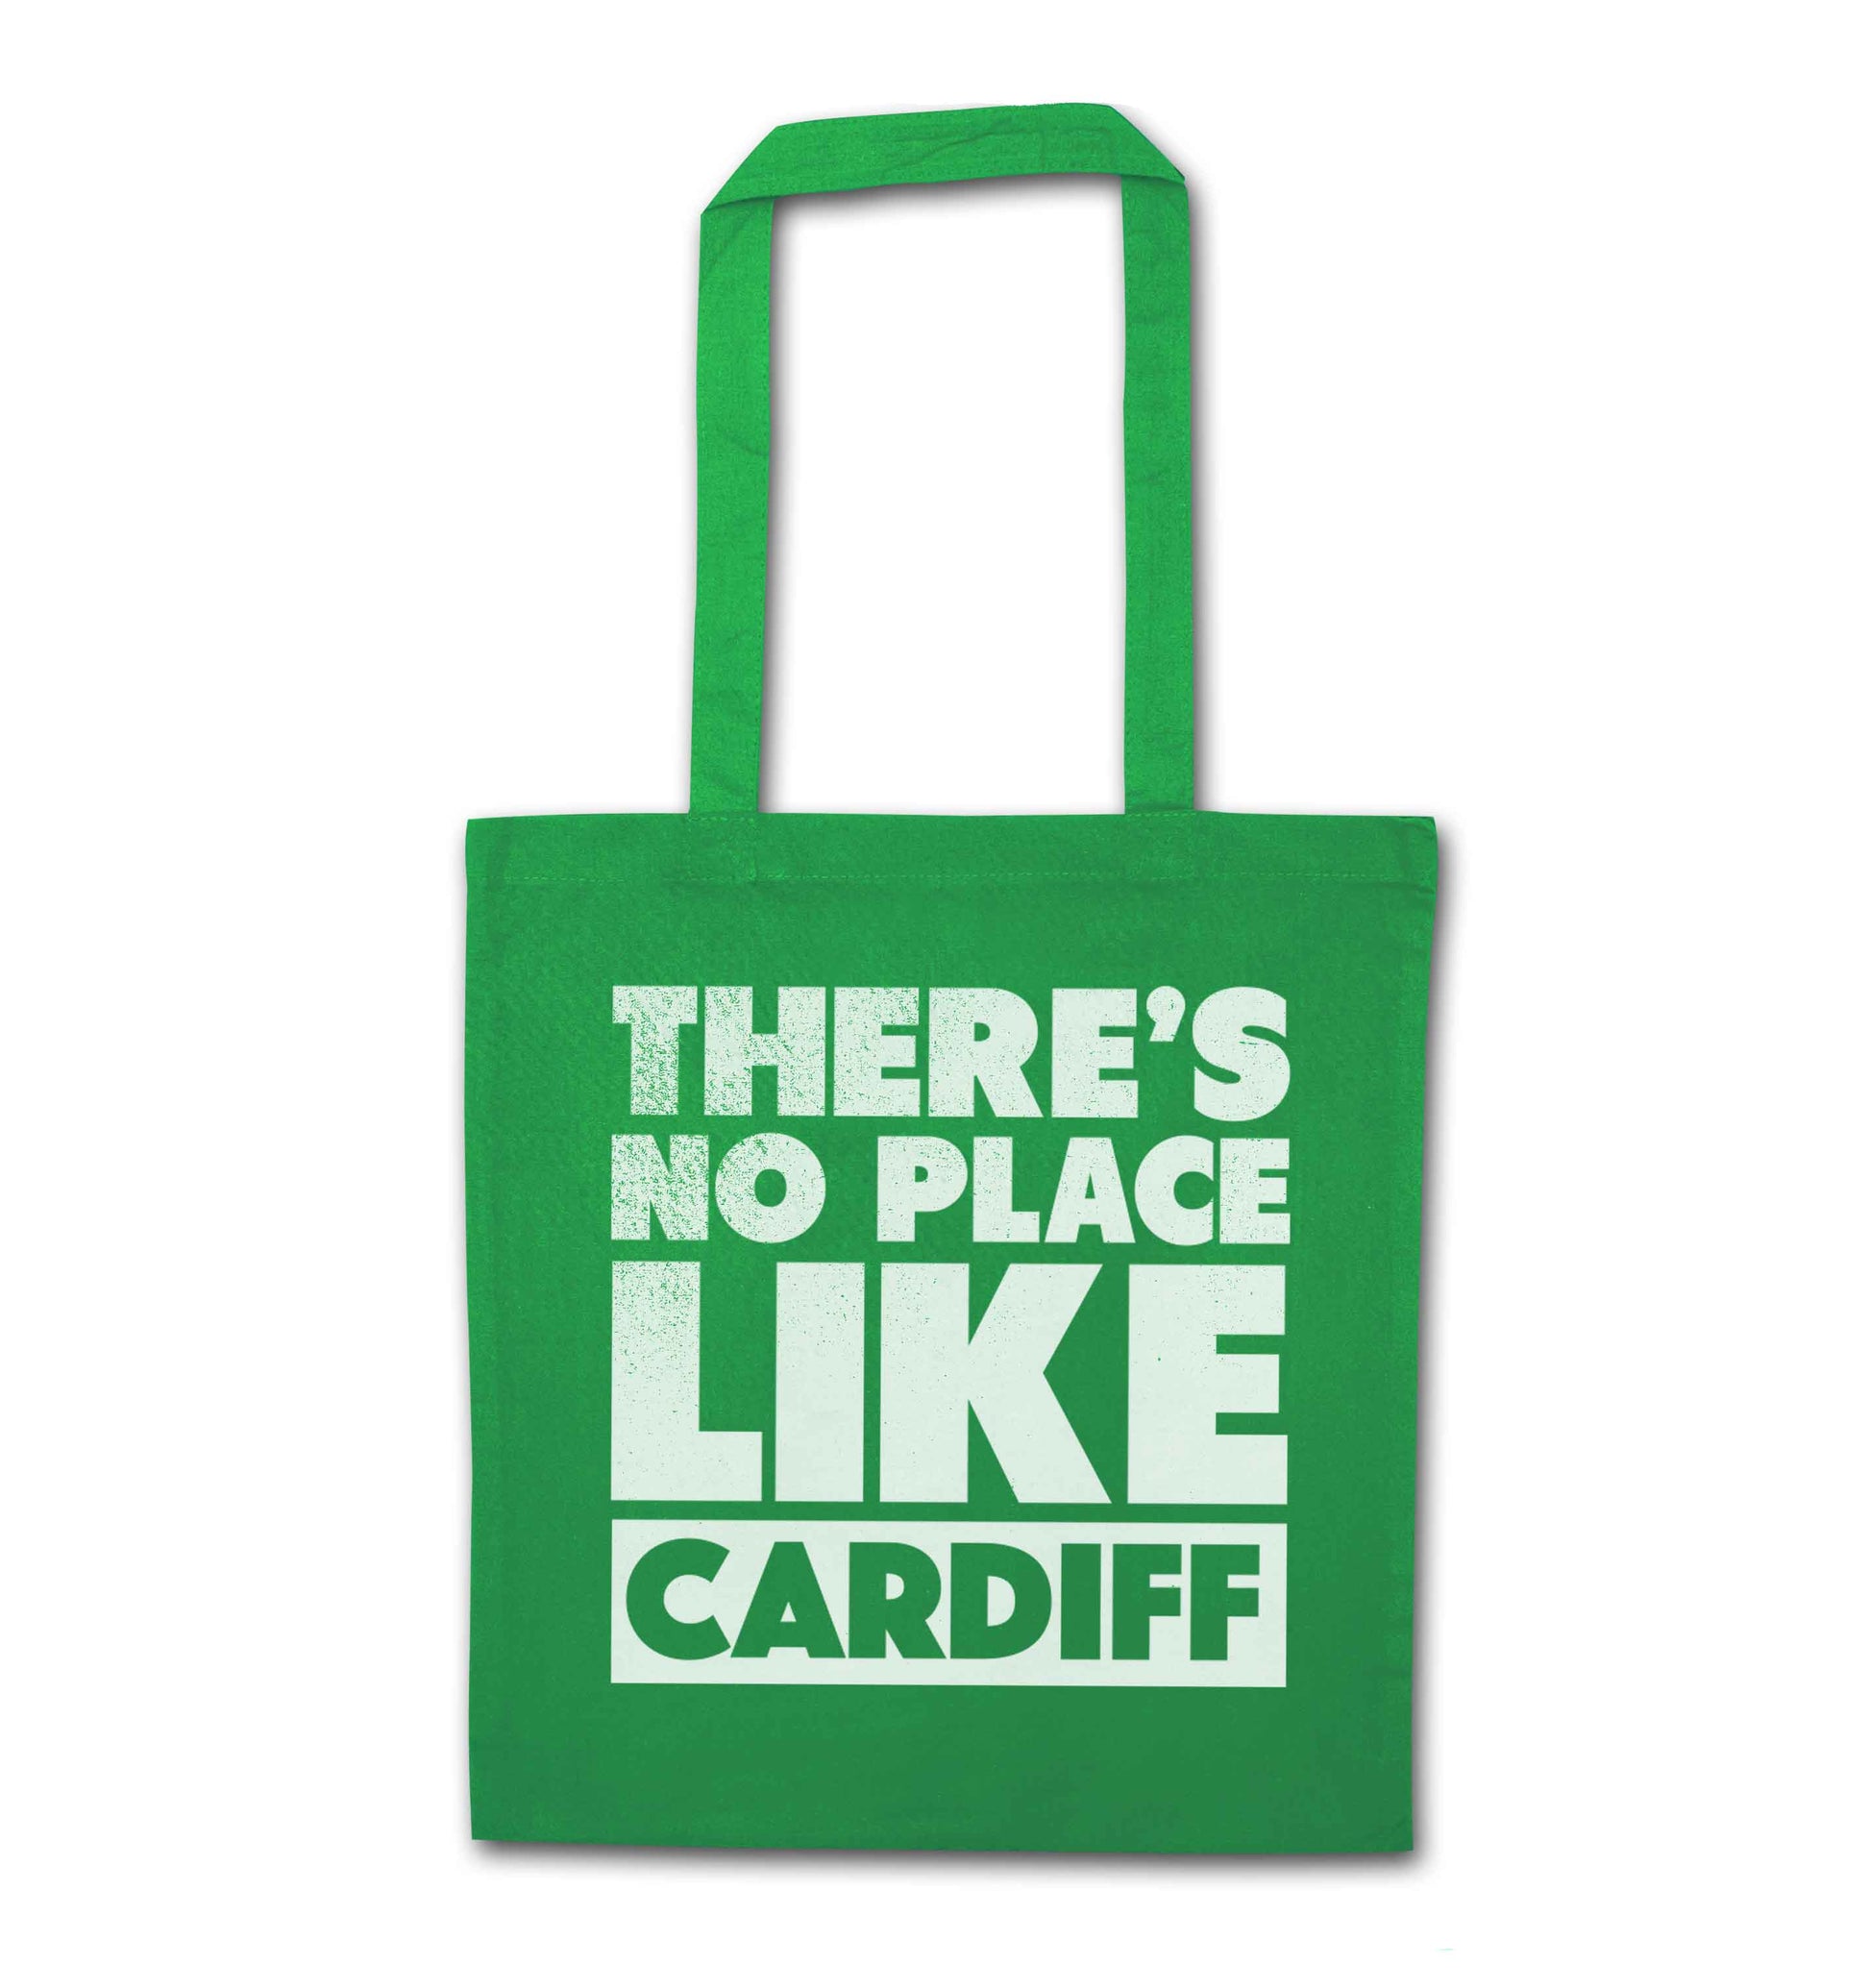 There's no place like Cardiff green tote bag